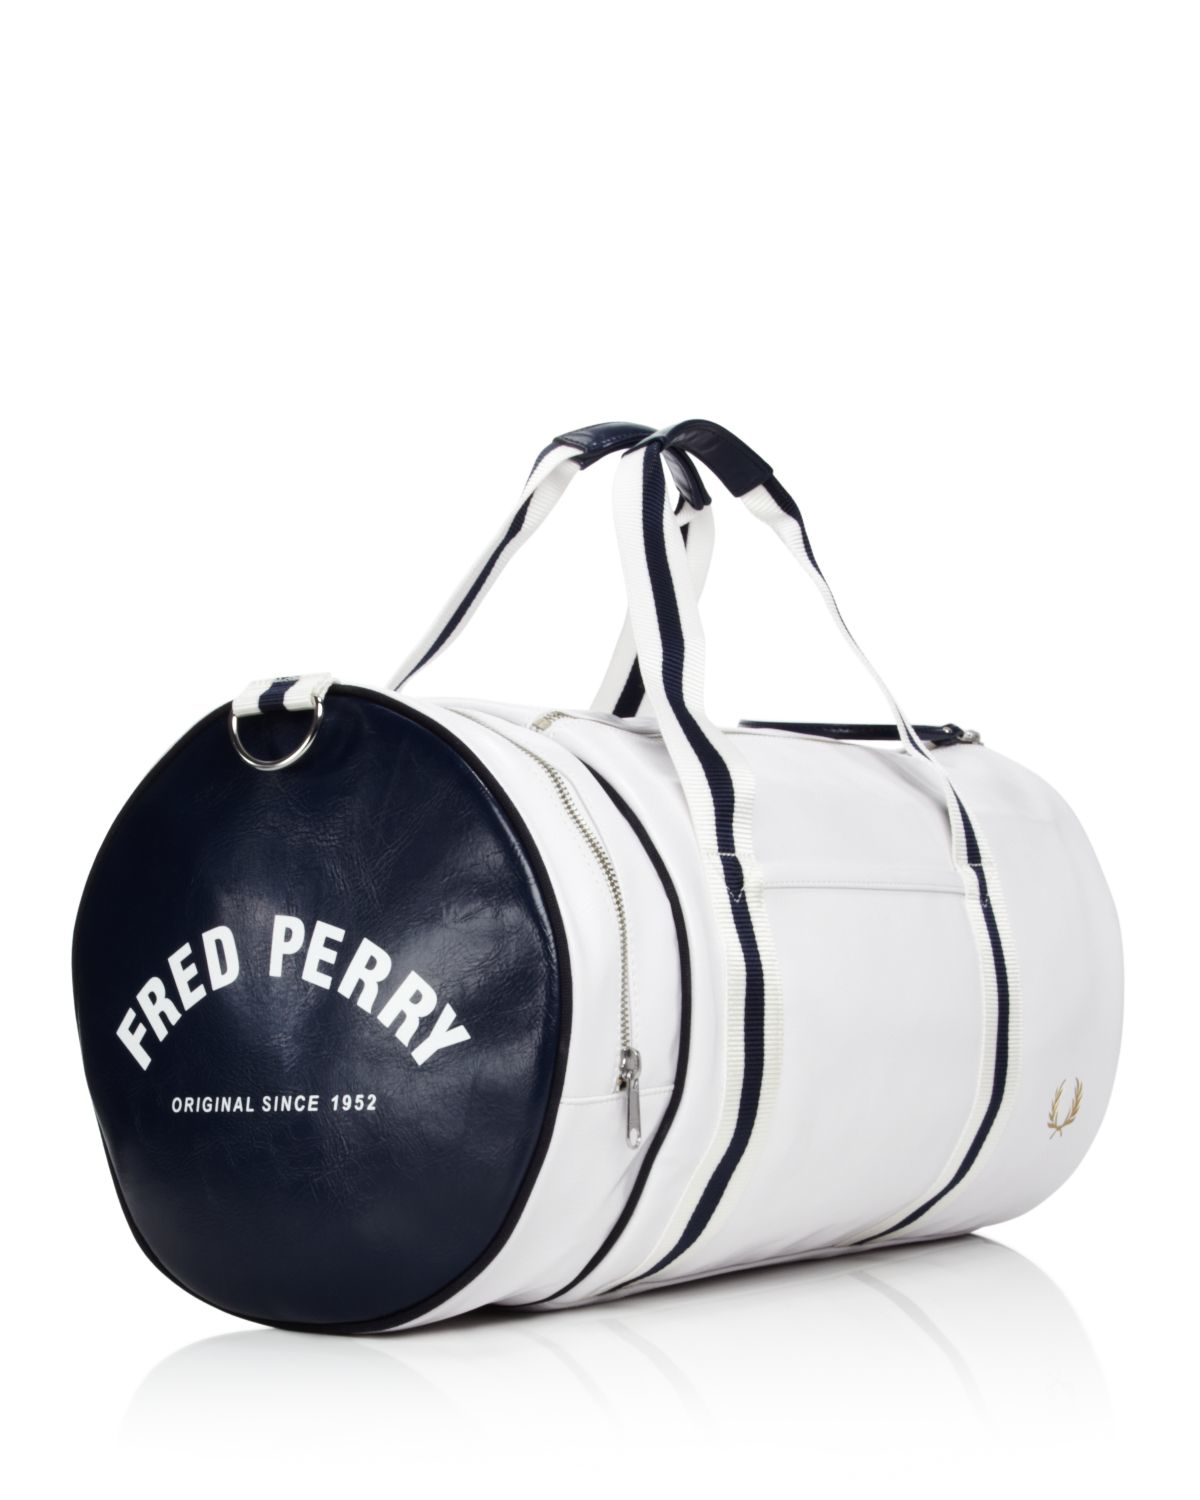 fred perry luggage 842dad